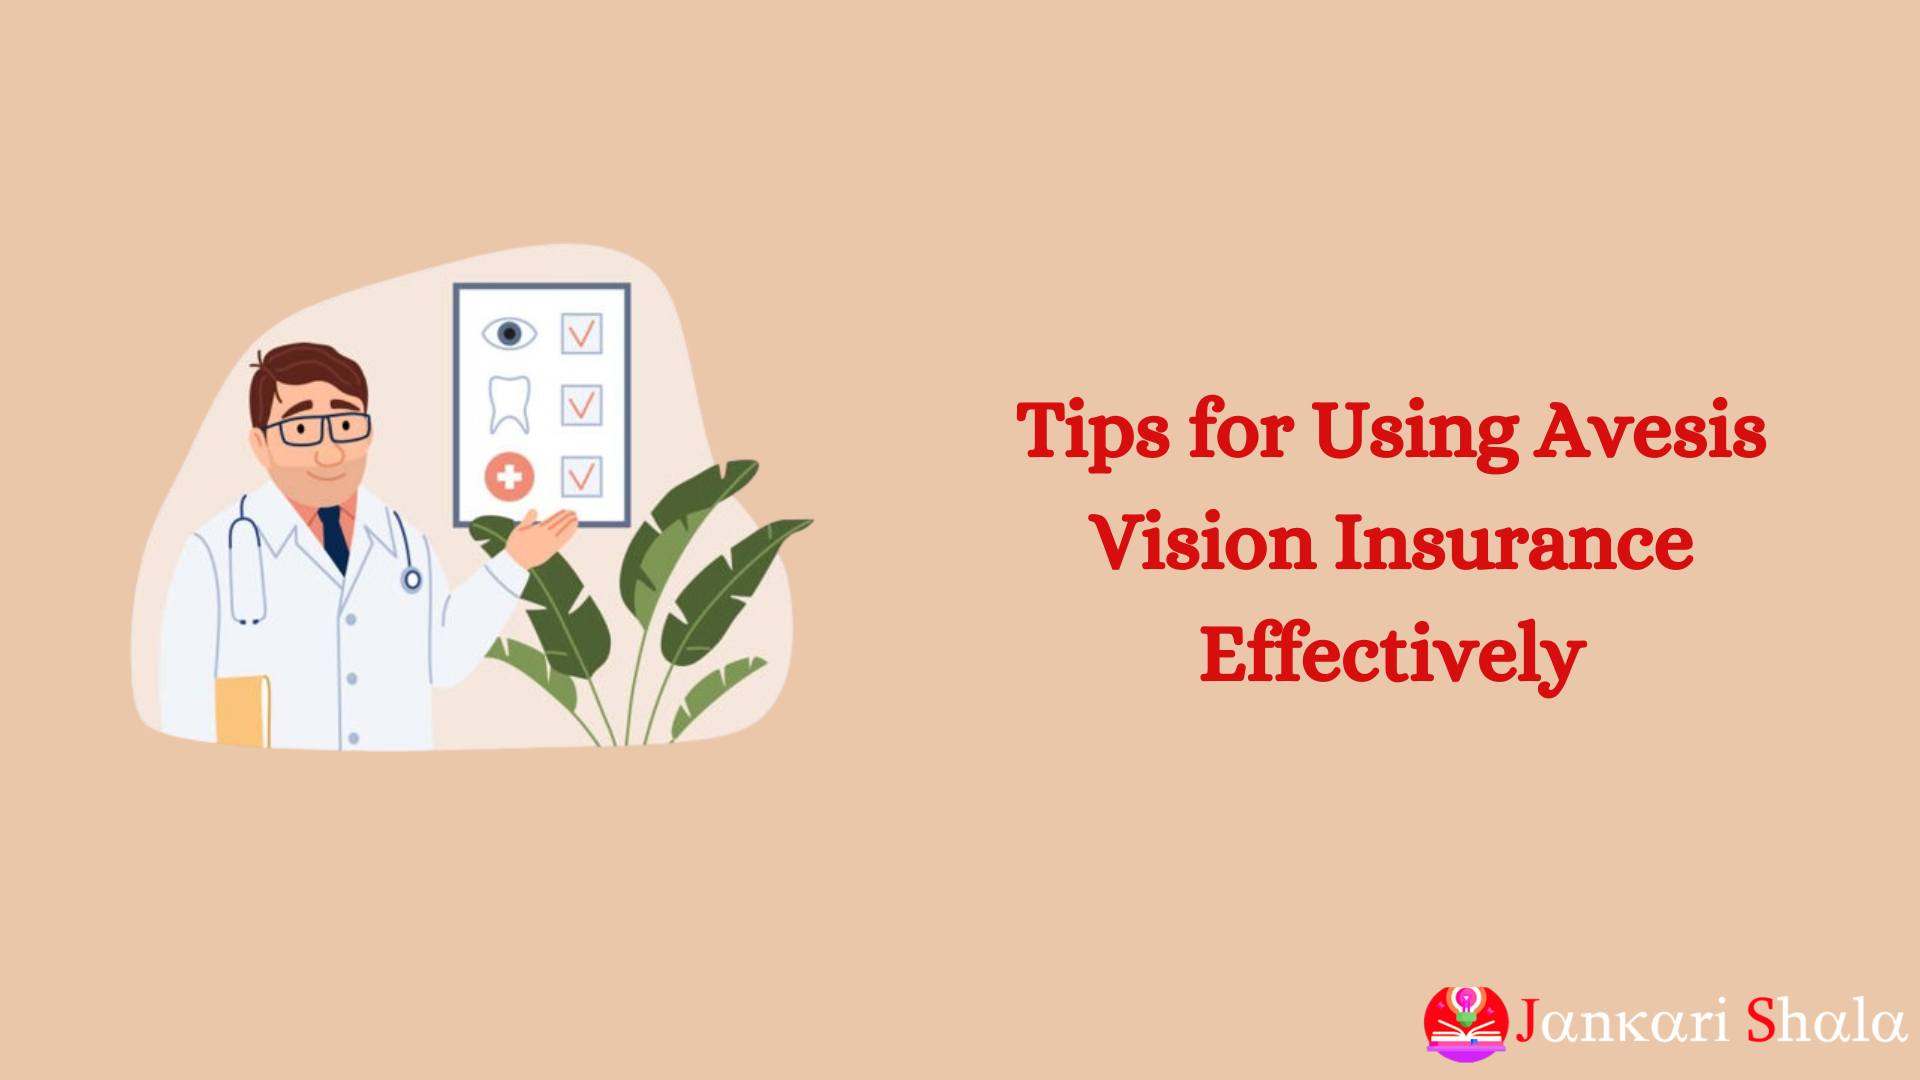 Tips for Using Avesis Vision Insurance Effectively